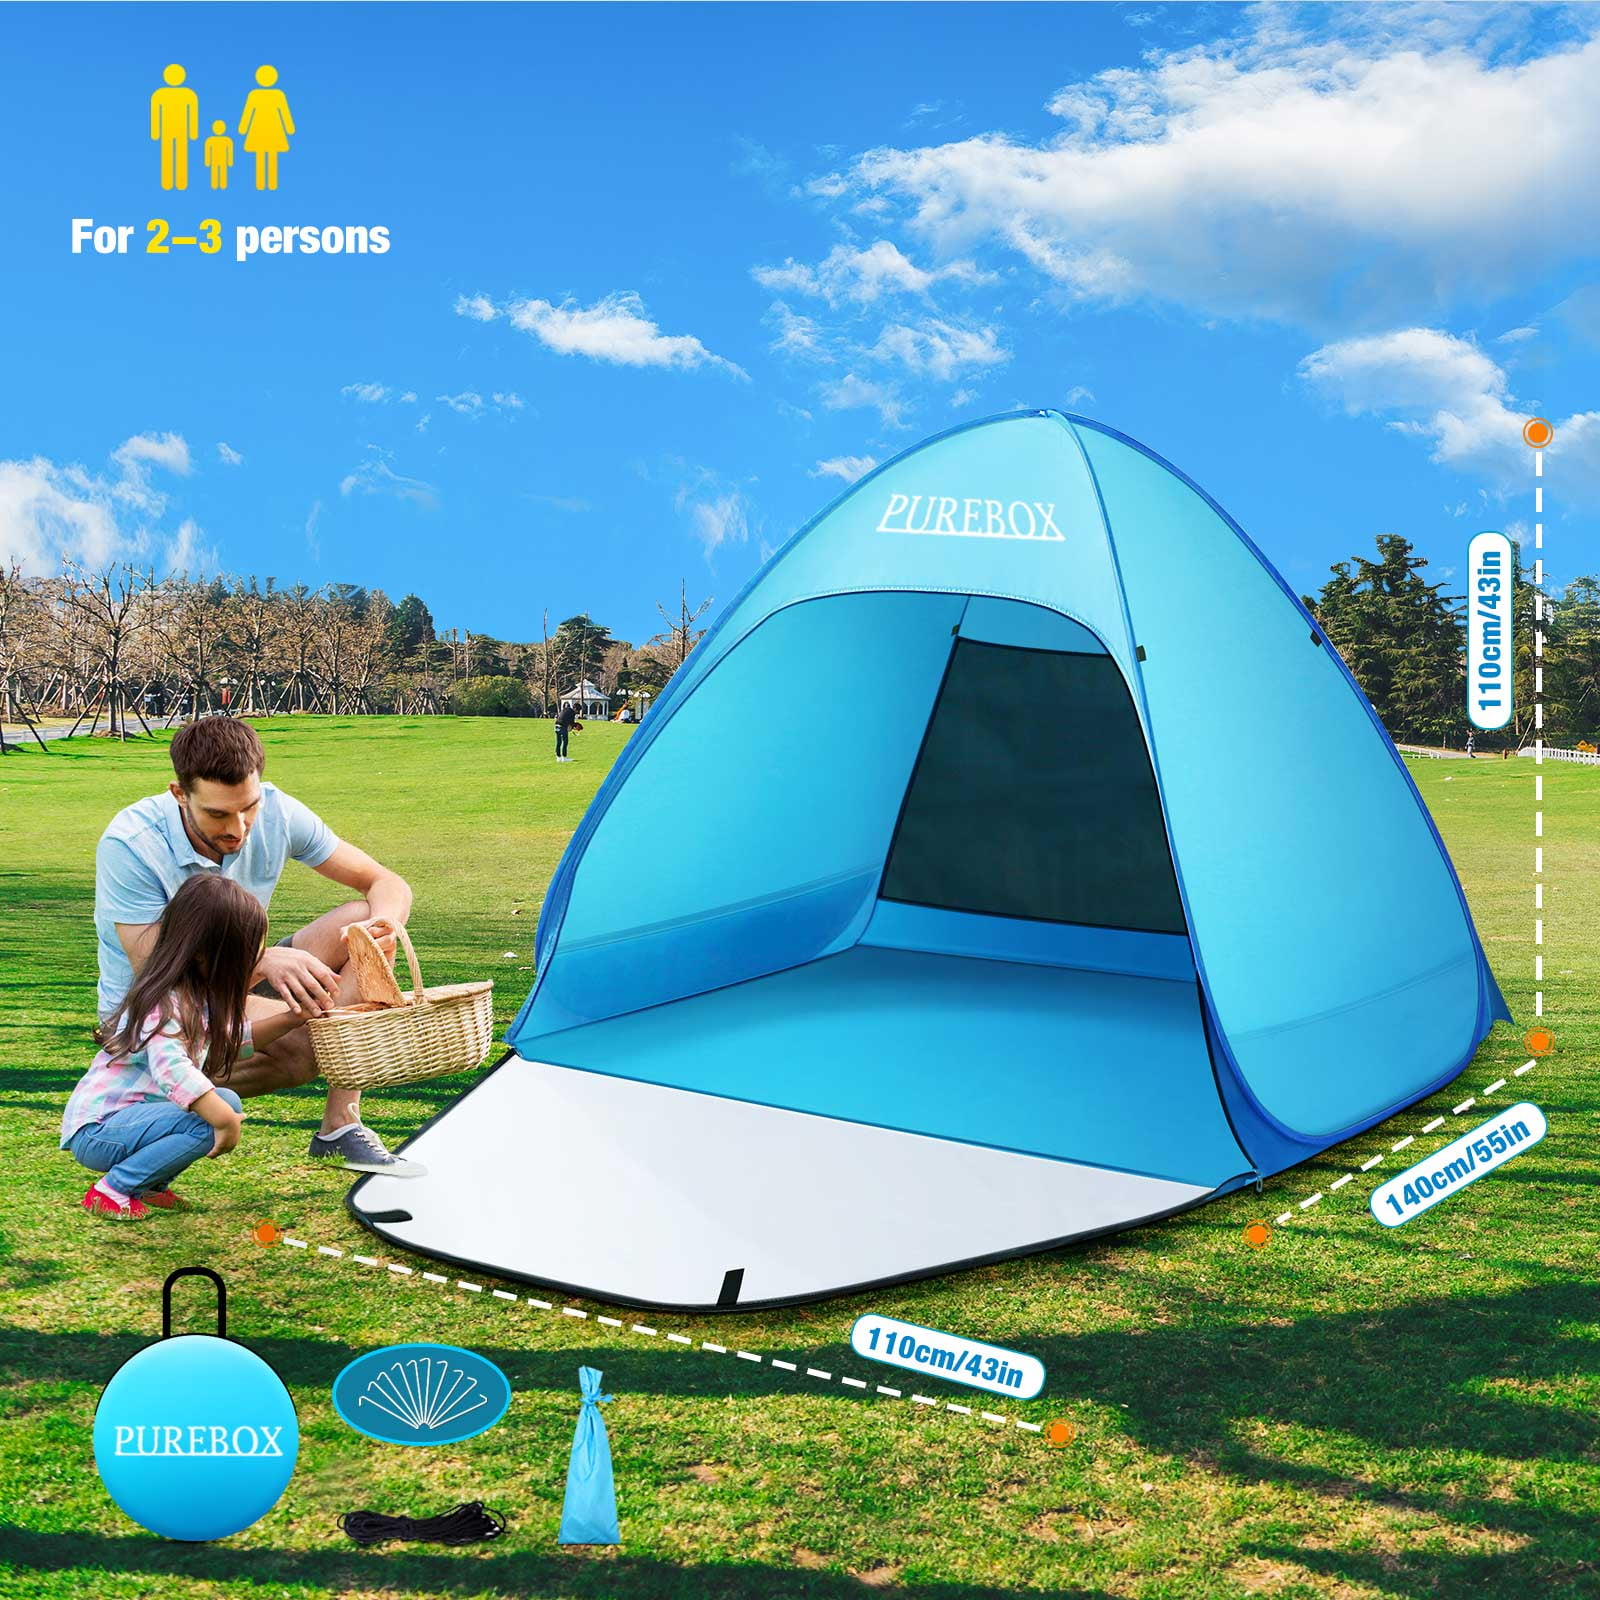 4-5 Person Automatic Outdoor Camping Tent Waterproof Sunshin US 2-3 